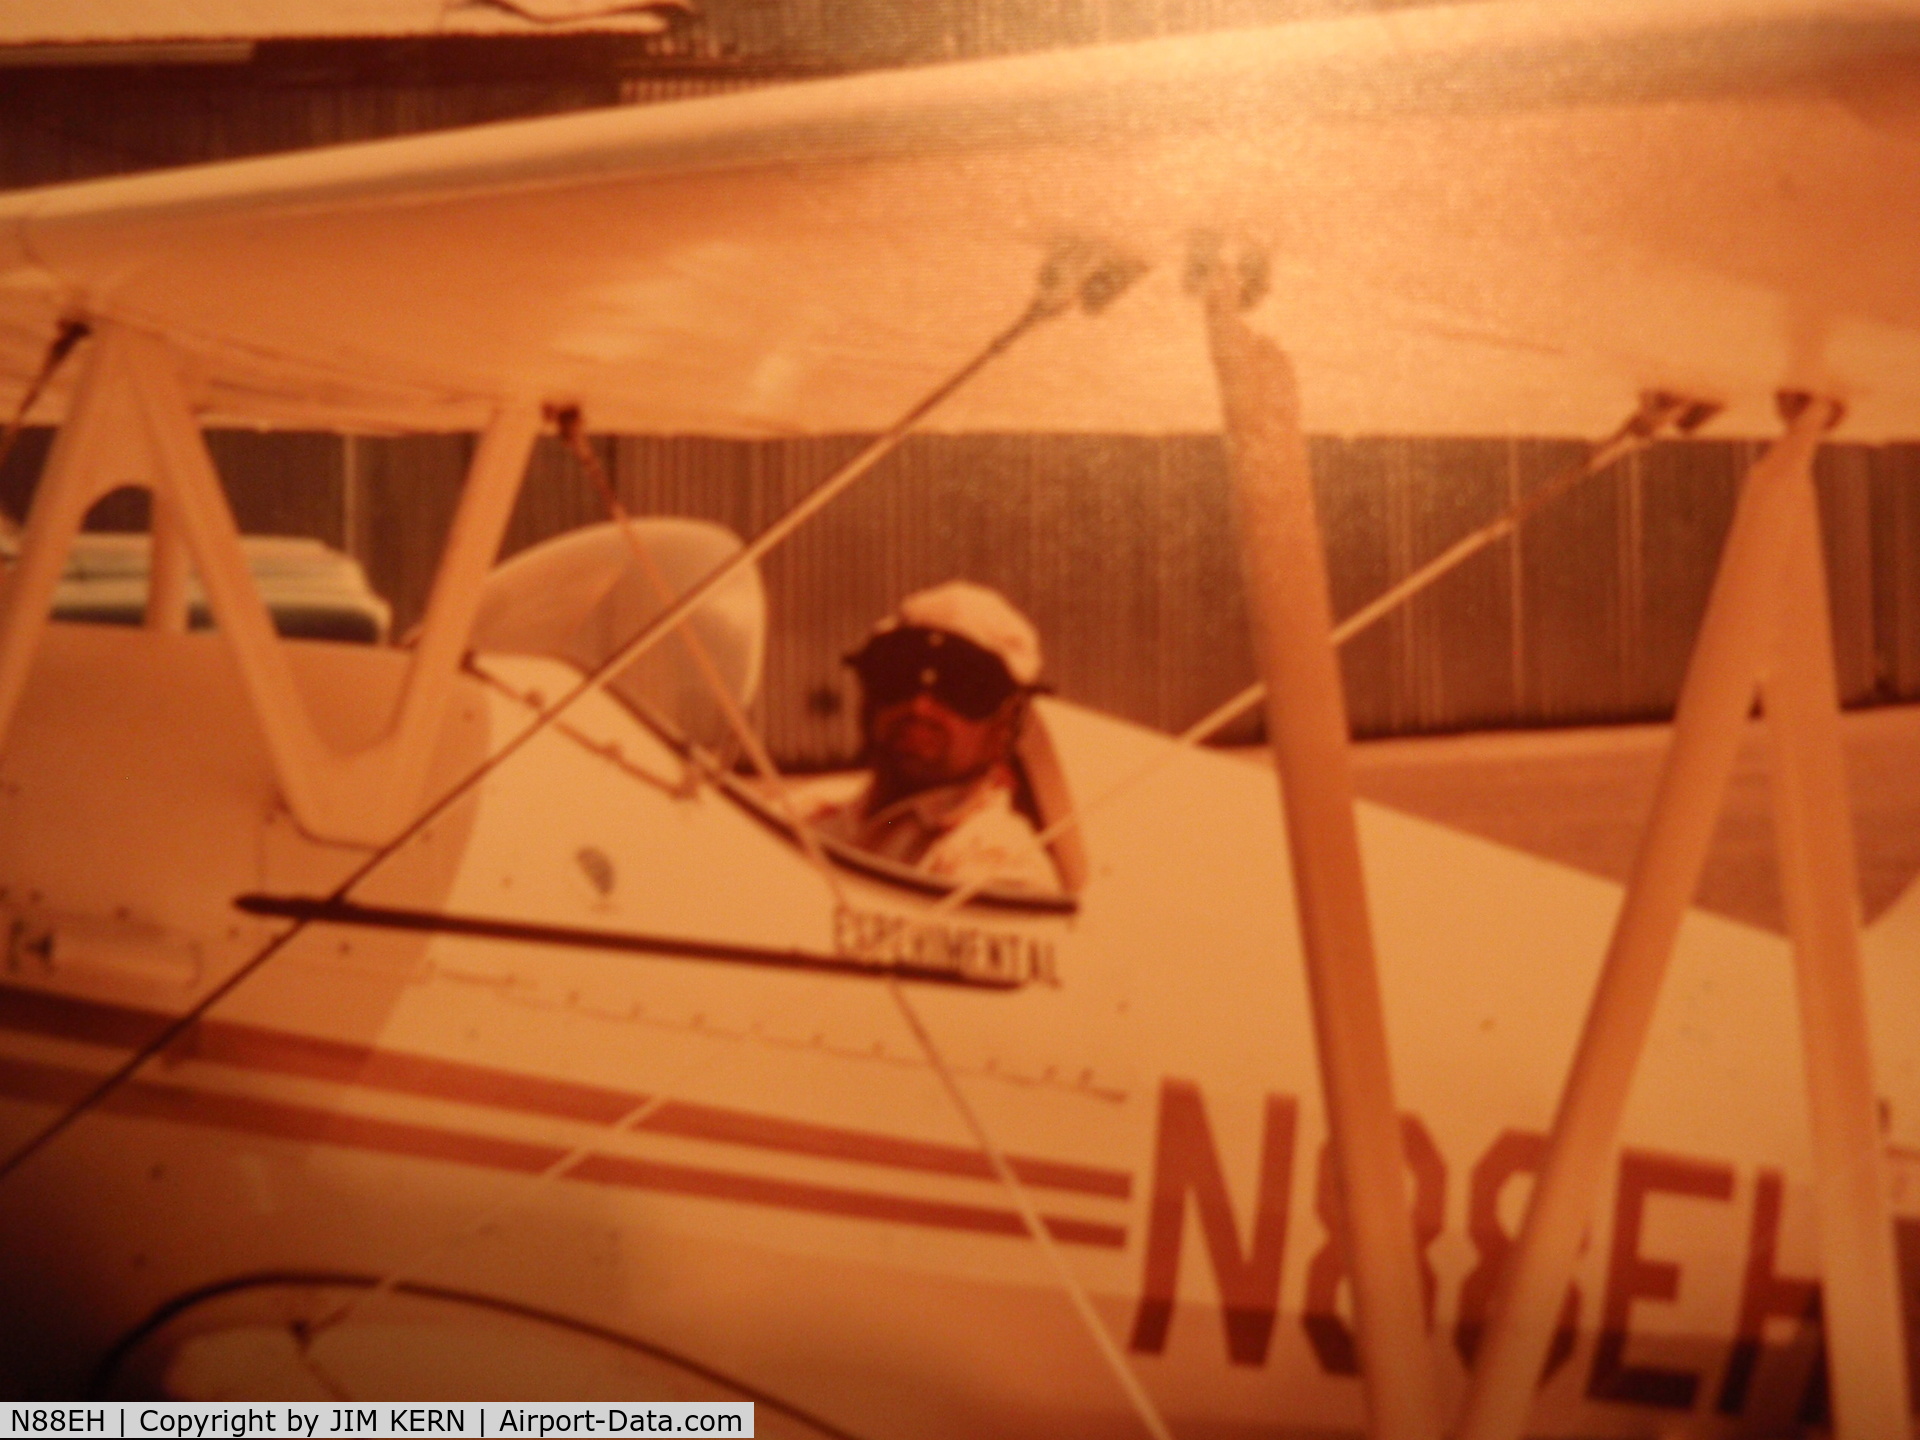 N88EH, 1970 EAA Biplane C/N EHH-1, ED HOOPER, BUILDER OF N88EH, IN COCKPIT.

JUST DISCOVERED YOUR WEBSITE !
HSAVE SOME PHOTOS OF CONSTRUCTION.